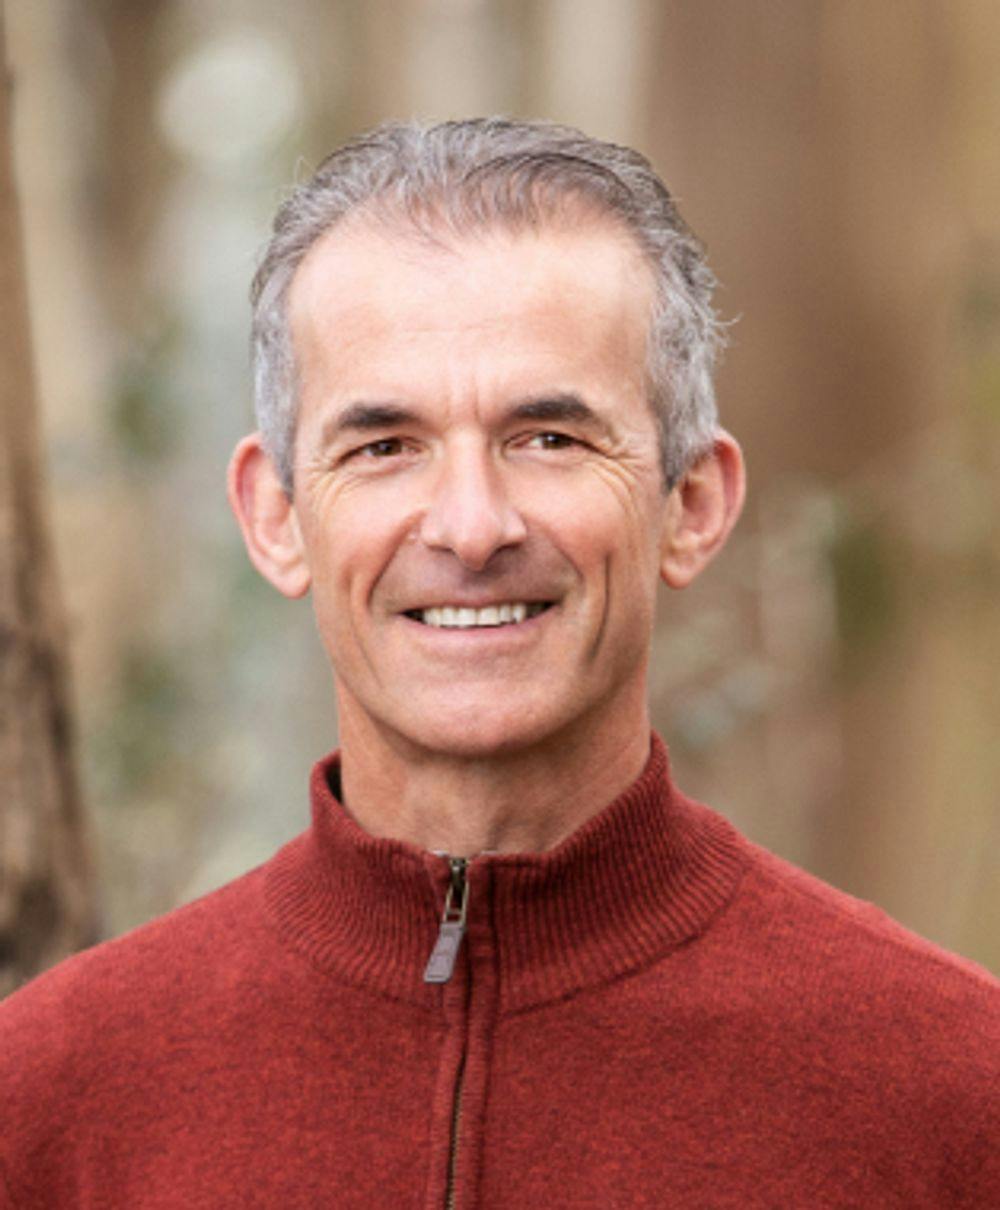 Mark Coleman - Mark is a mindfulness teacher and author of From Suffering to Peace (2019) and Make Peace With Your Mind (2016). 